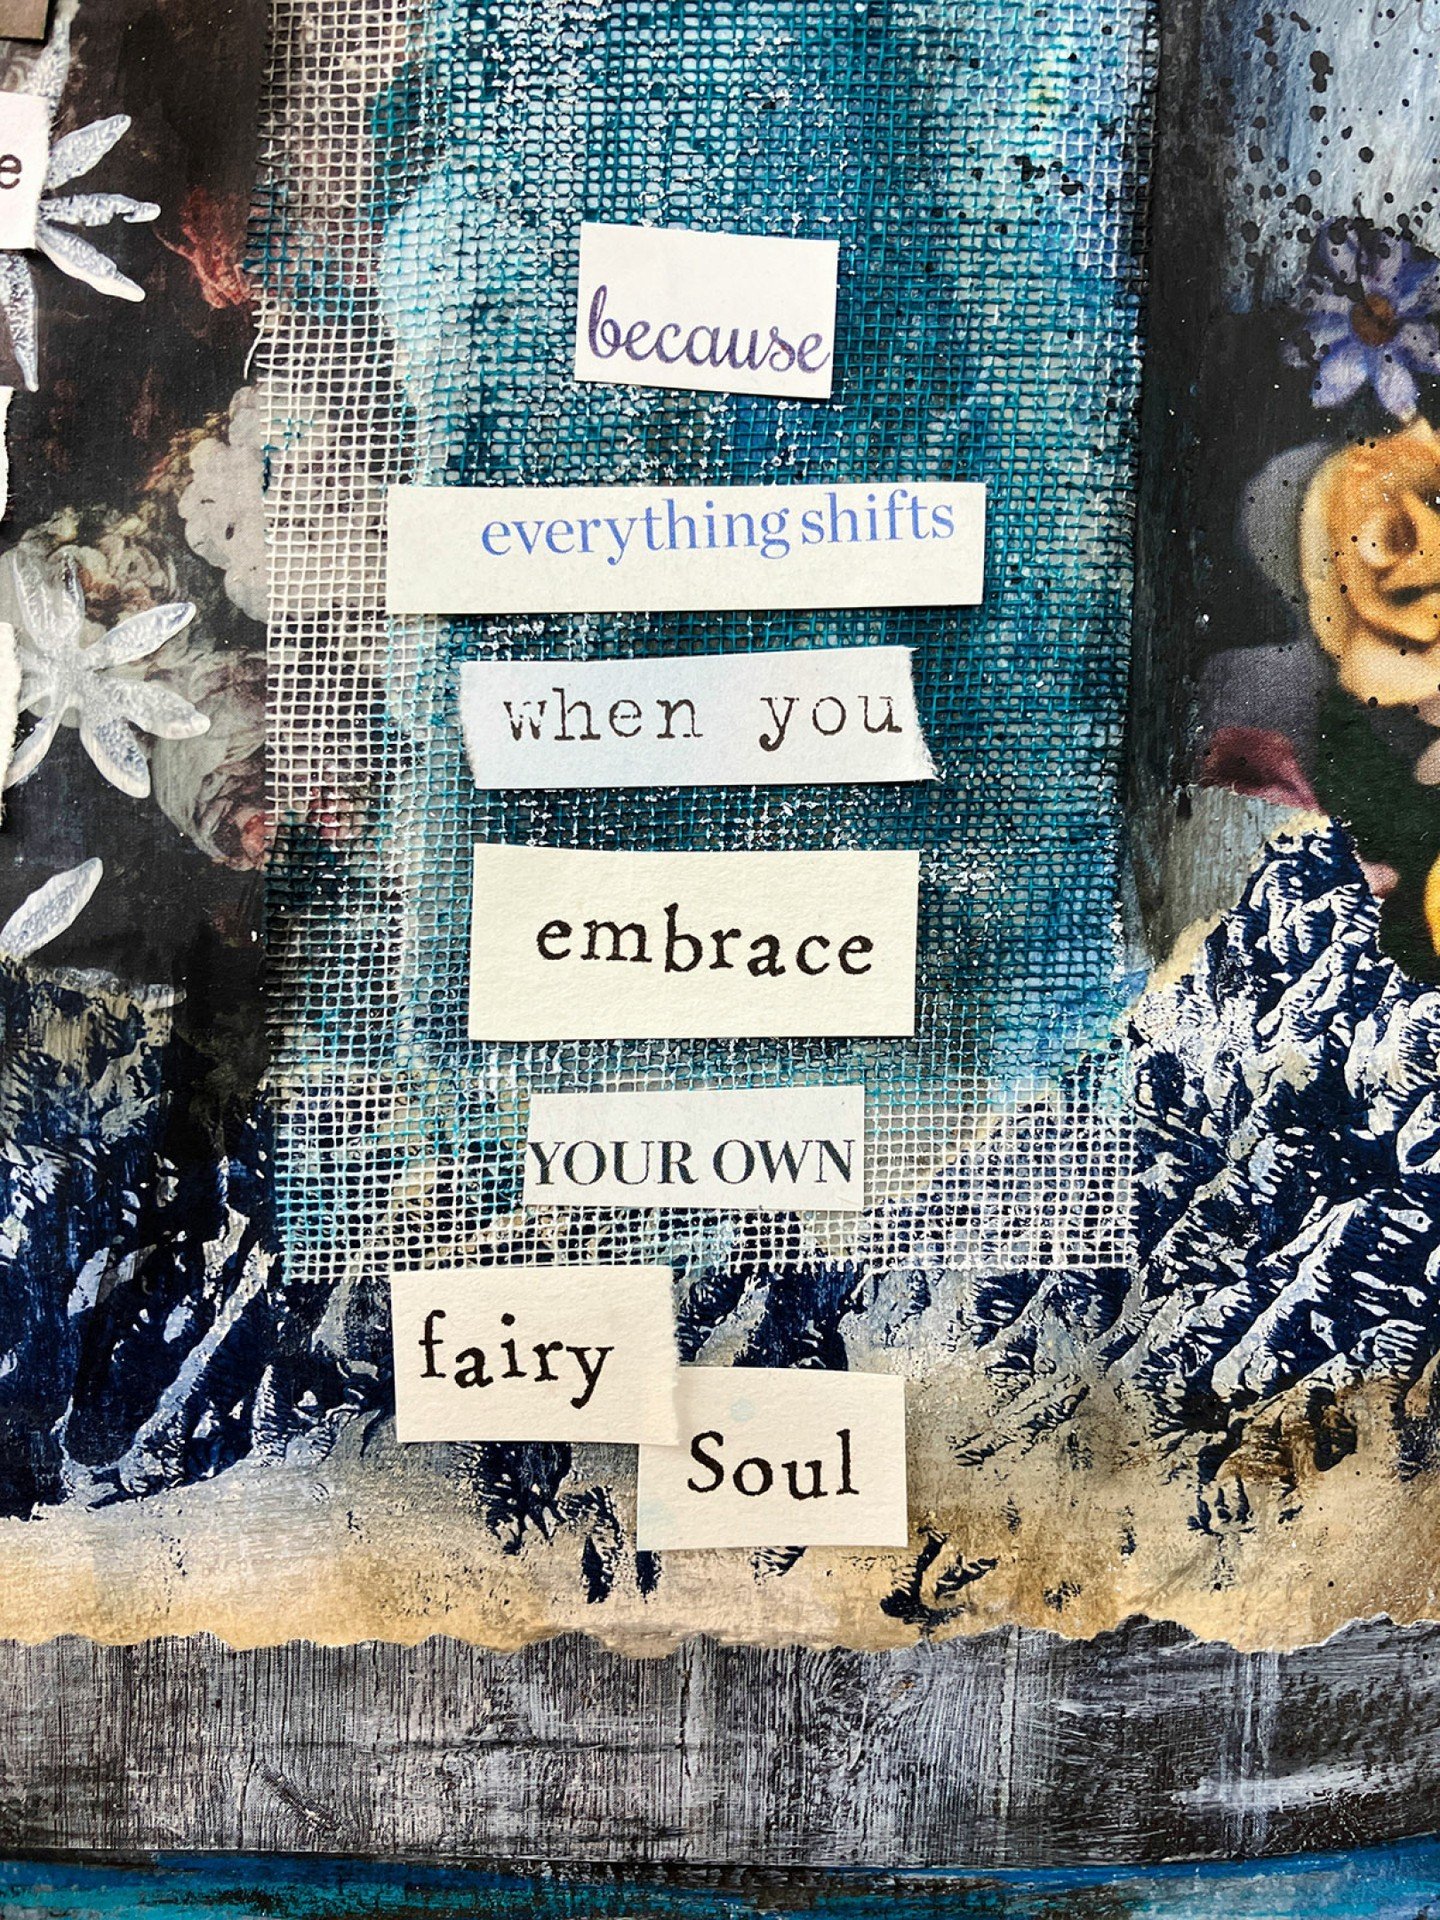 This week I've been playing with cut-out words in my art journal. I love the serendipity of this process, letting stories emerge intuitively. It doesn't have to fully make sense, but it never fails to express something from deep within. Combining wor